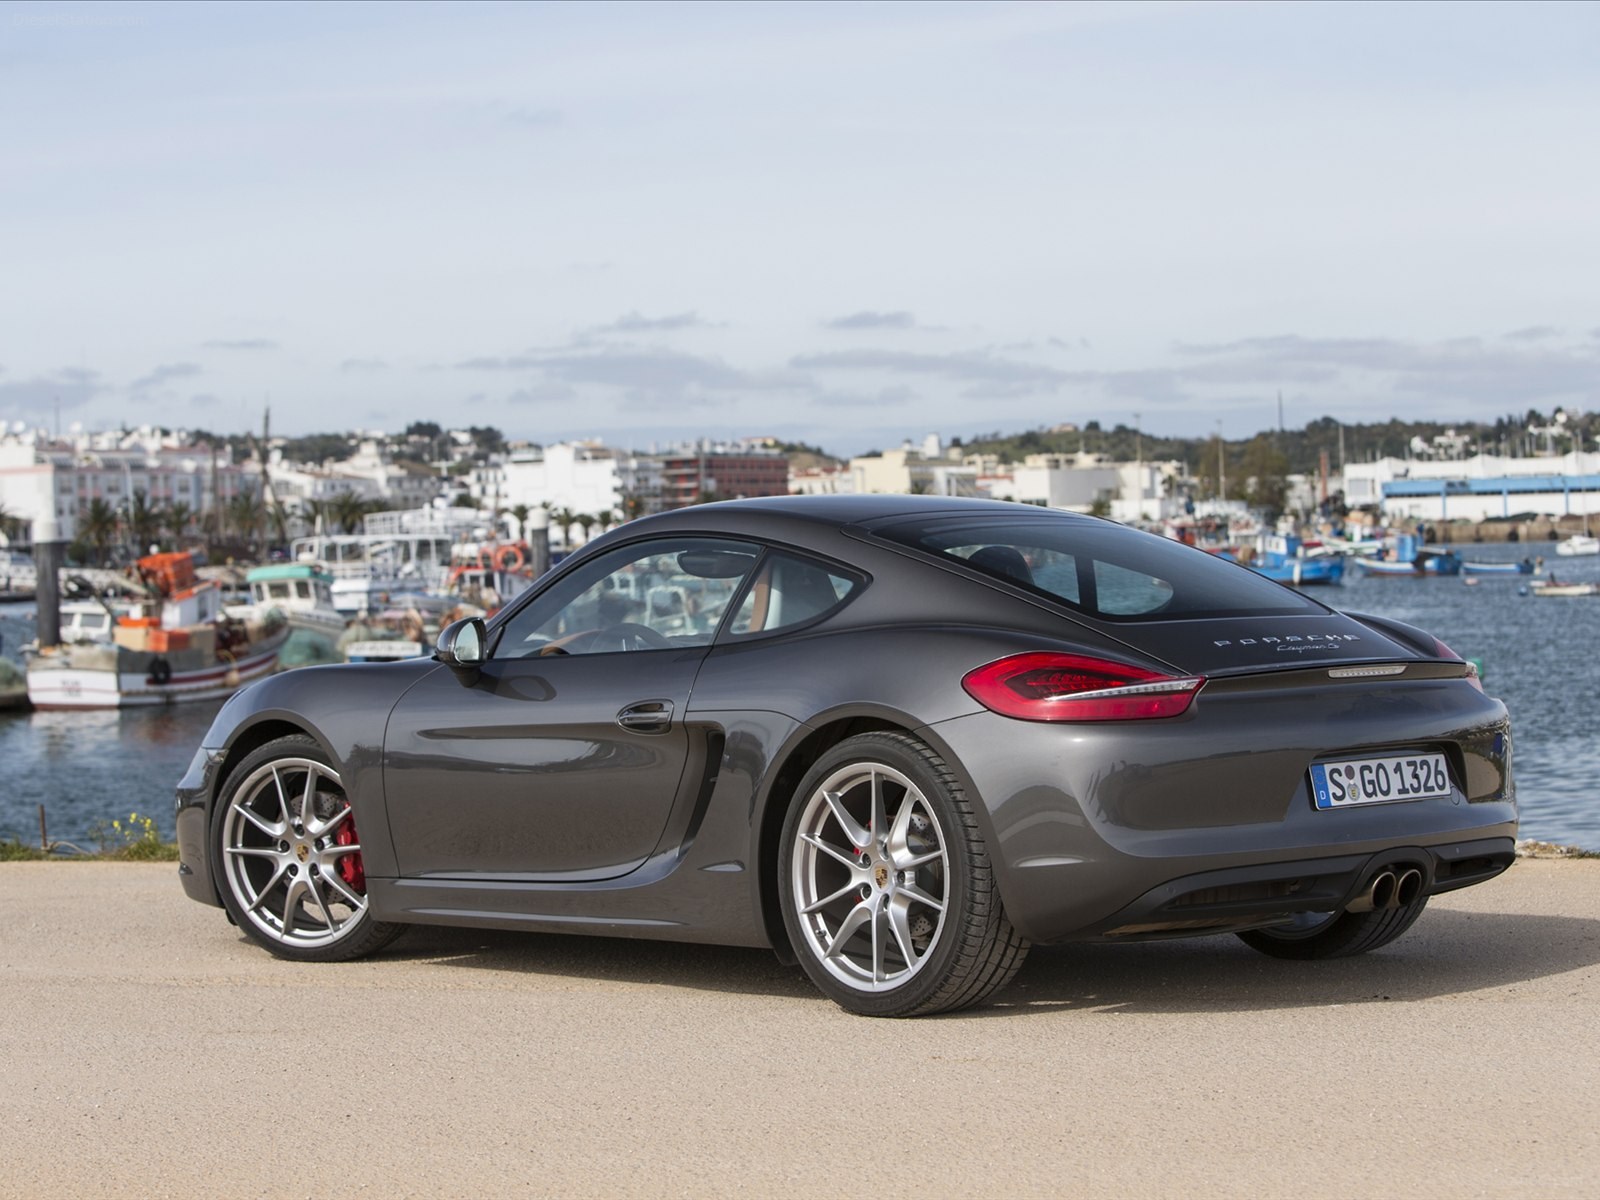 ... Porsche Cayman Car Review car wallpaper, picture in HD overview